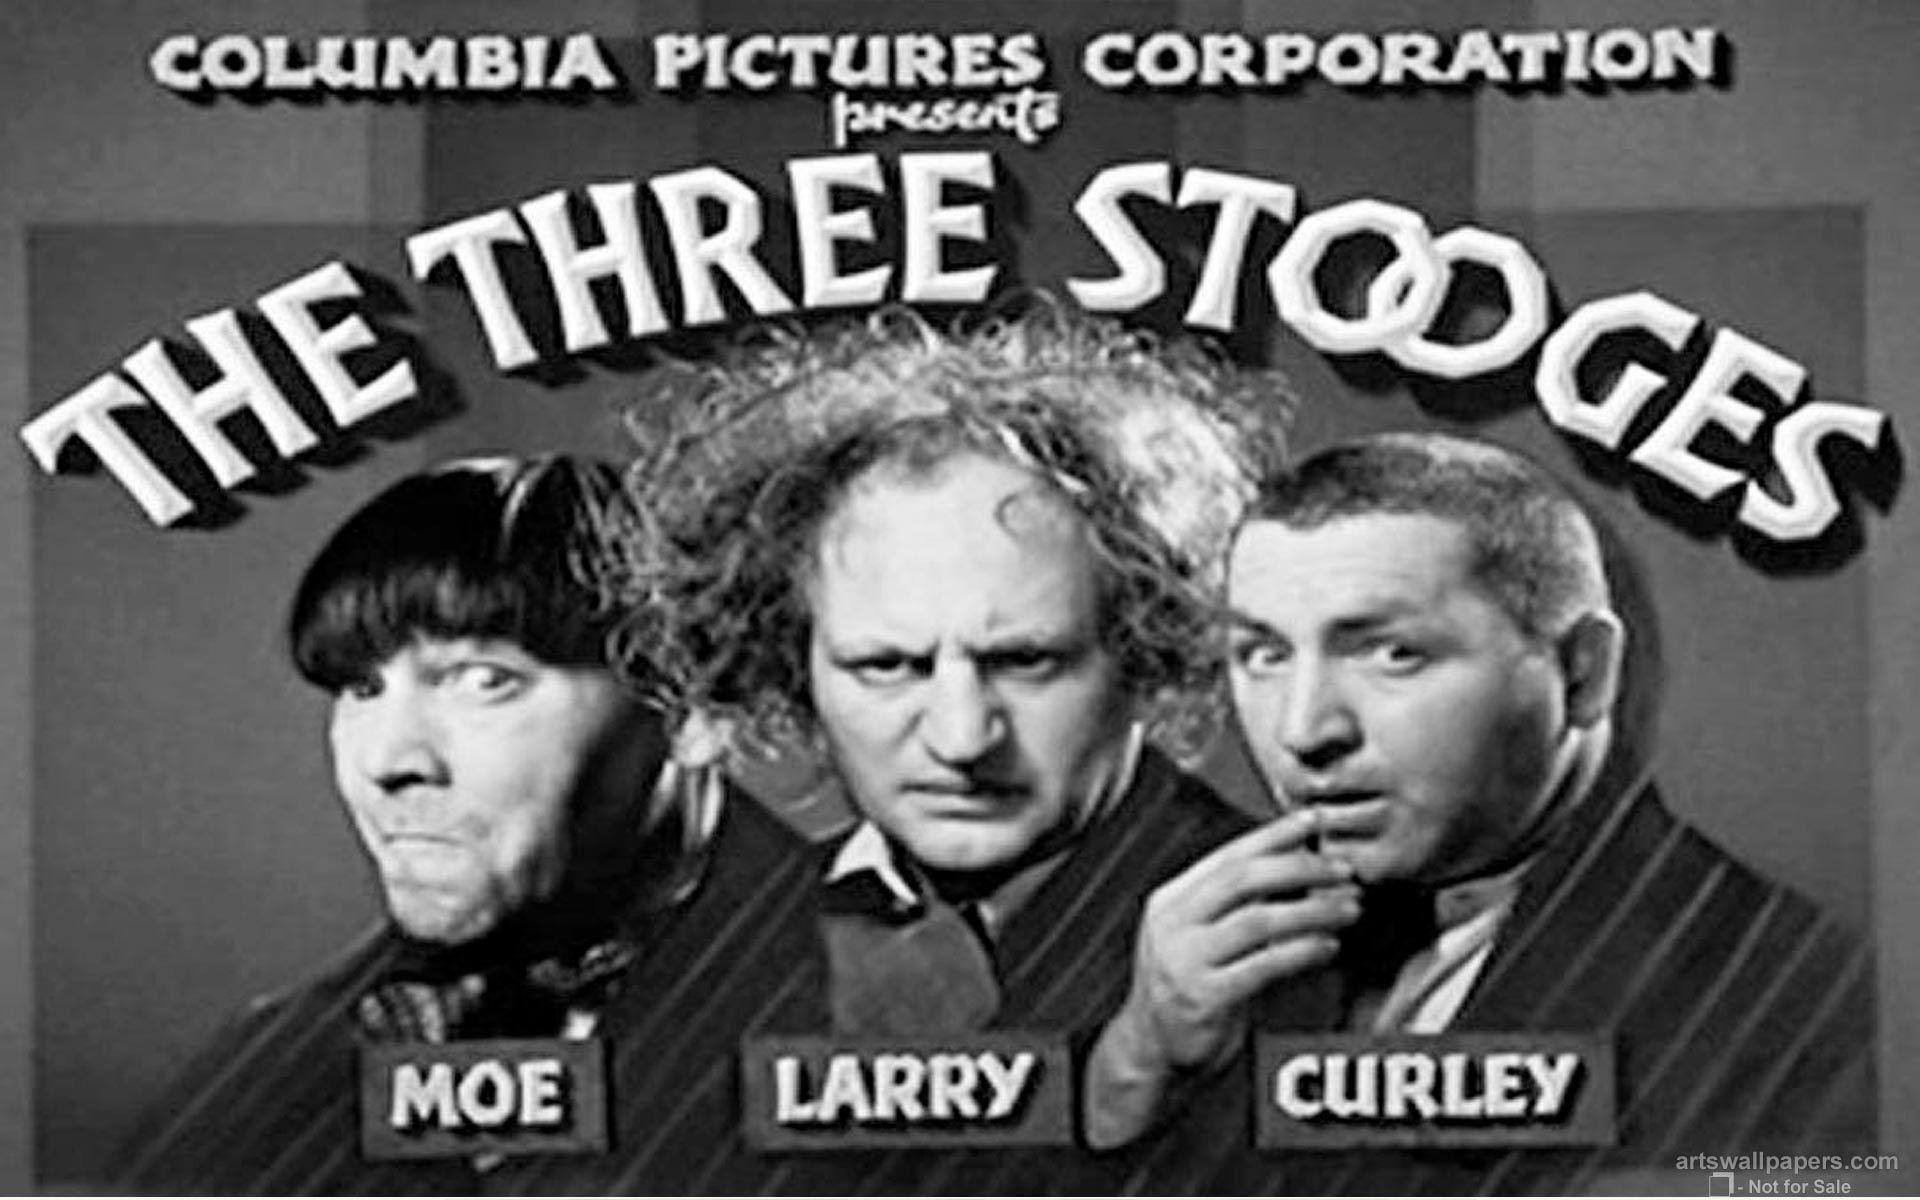 The Three Stooges Wallpaper 01. BOGART AND COMPANY